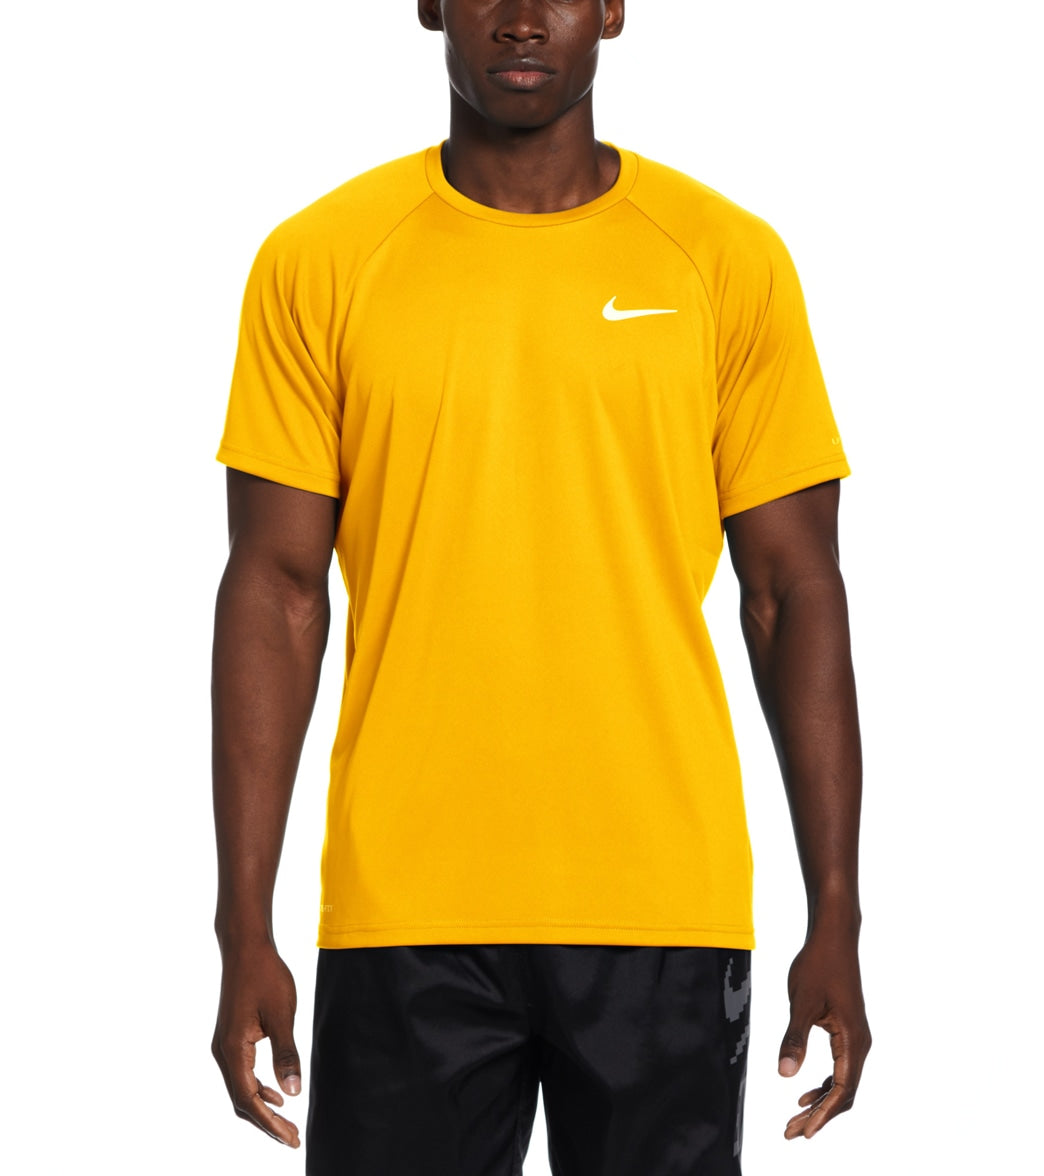 Nike Swimming short sleeve hydroguard t-shirt in blue